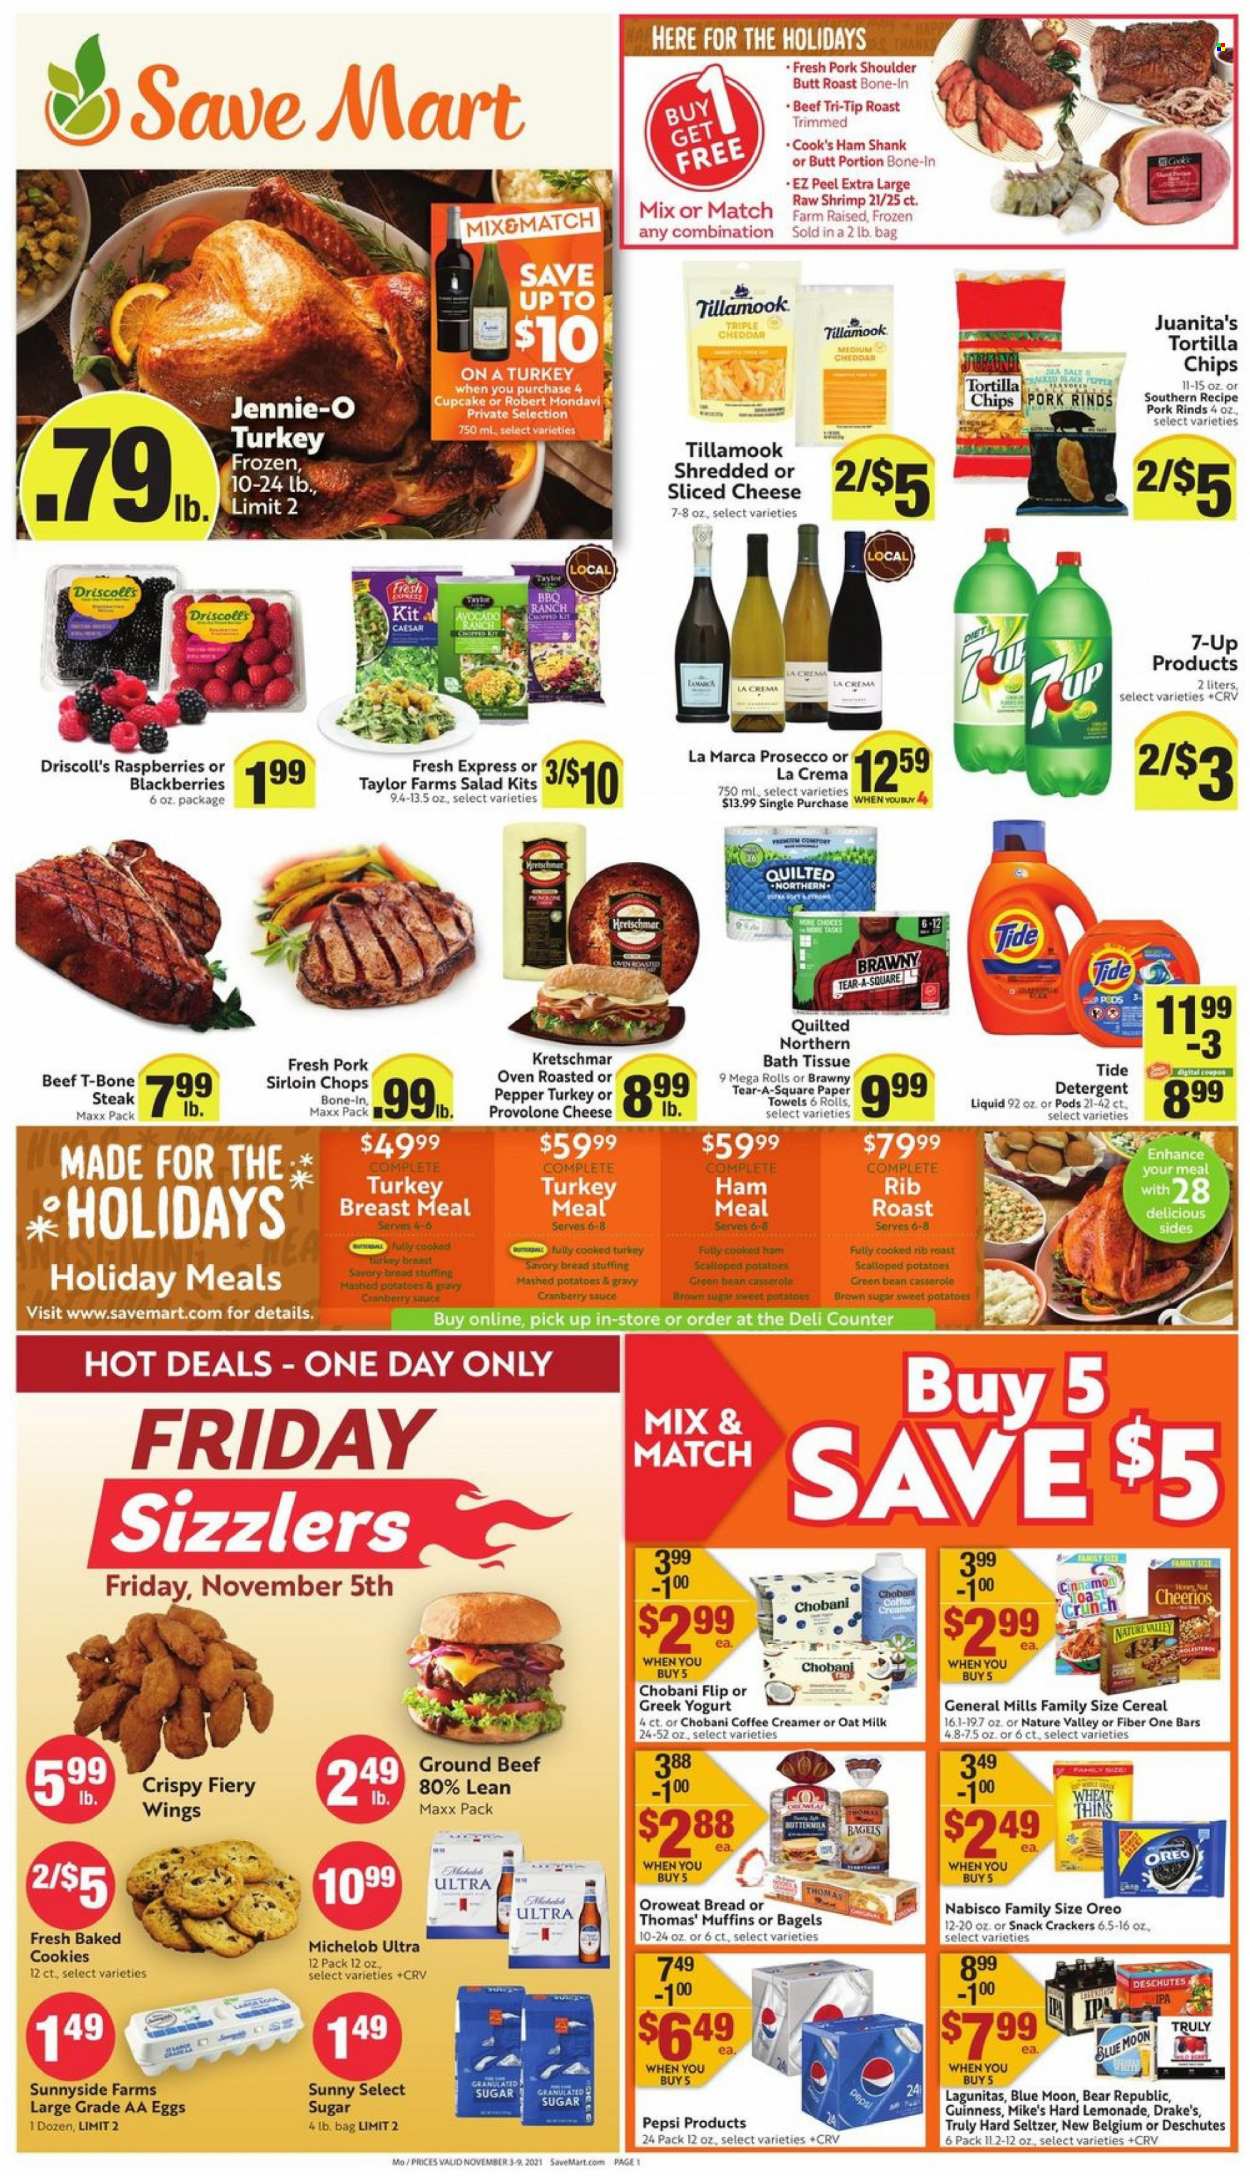 thumbnail - Save Mart Flyer - 11/03/2021 - 11/09/2021 - Sales products - bagels, bread, cupcake, muffin, sweet potato, avocado, blackberries, beef meat, ground beef, t-bone steak, steak, pork meat, pork shoulder, shrimps, mashed potatoes, sauce, cooked ham, ham, ham shank, Cook's, sliced cheese, cheese, Provolone, greek yoghurt, Oreo, yoghurt, Chobani, buttermilk, oat milk, eggs, creamer, cookies, crackers, tortilla chips, Thins, cane sugar, salt, cereals, Cheerios, Nature Valley, Fiber One, cinnamon, cranberry sauce, lemonade, Pepsi, 7UP, prosecco, Hard Seltzer, TRULY, beer, Guinness, IPA, Tide, Blue Moon, Michelob. Page 1.